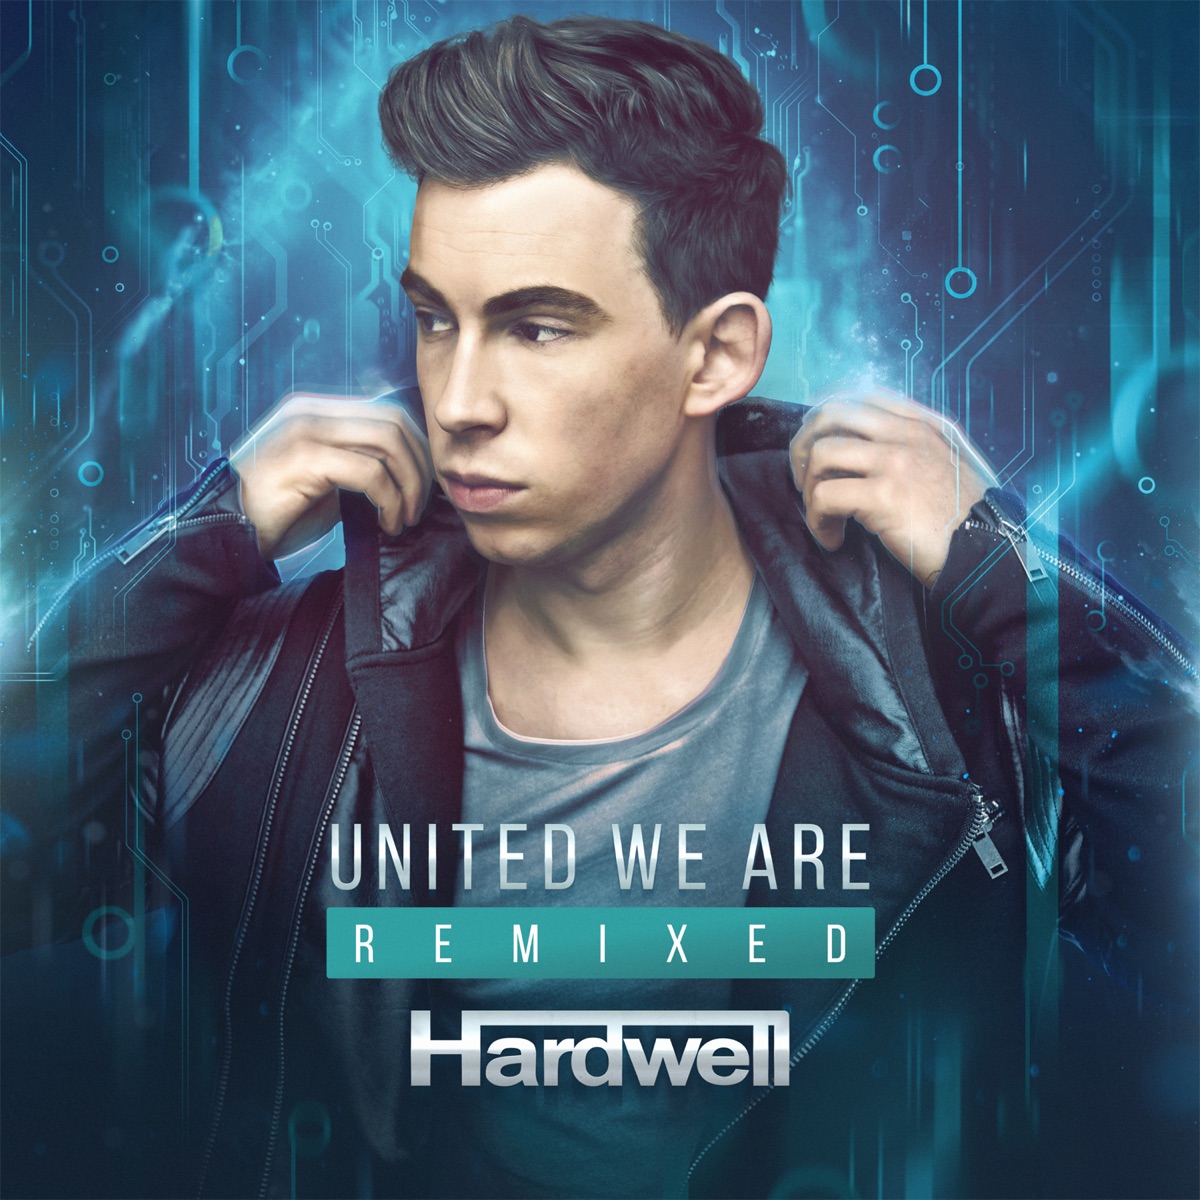 Spaceman (Outer Space Remixes) - EP - Album by Hardwell - Apple Music